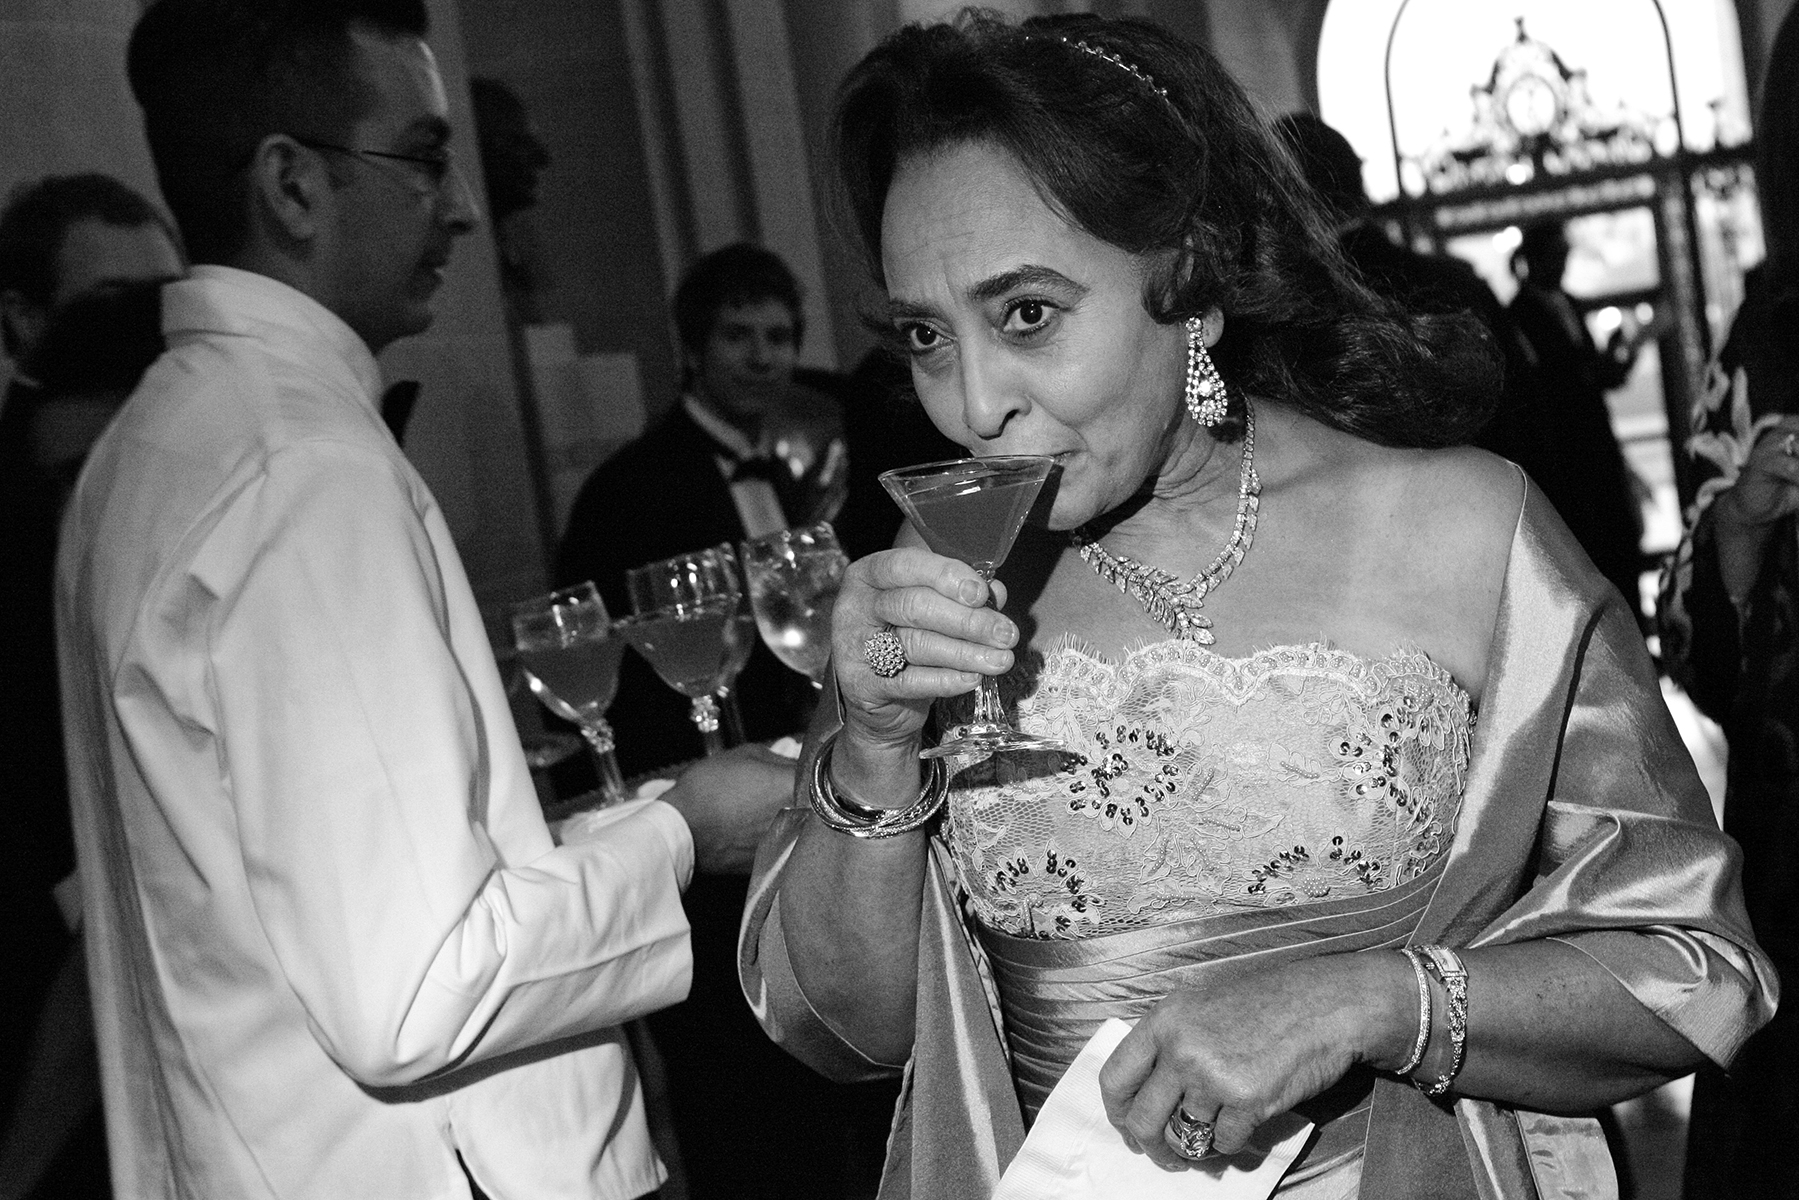 Jewelle Taylor Gibbs takes a sip from her cocktail during a gala to celebrate the first anniversary of the Museum of the African Diaspora at San Francisco City Hall in San Francisco, Calif., on Saturday, March 10, 2007. This photograph is of a candid moment and was not directed in any way.